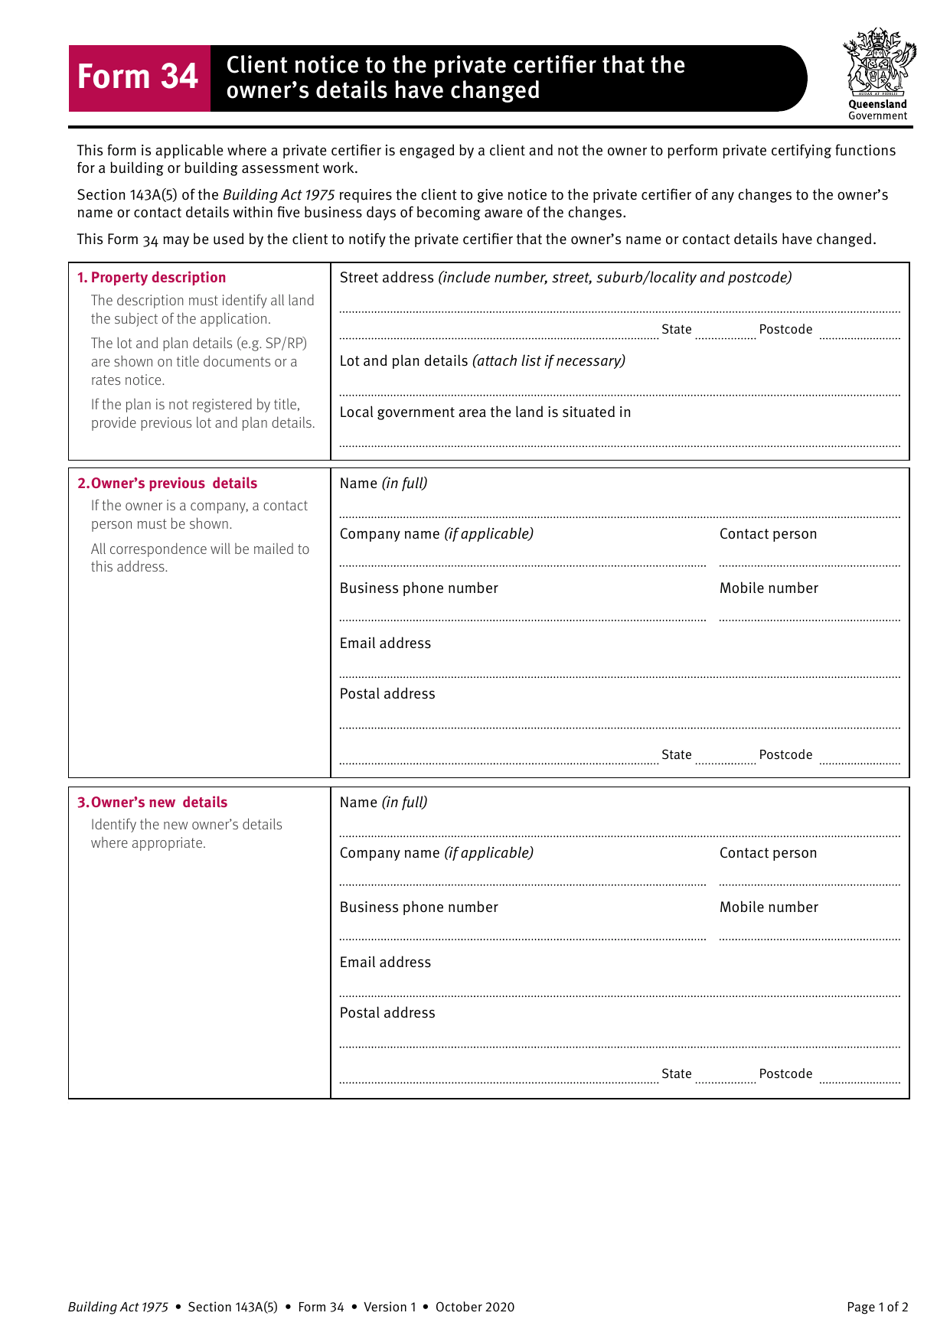 Form 34 Client Notice to the Private Certifier That the Owners Details Have Changed - Queensland, Australia, Page 1